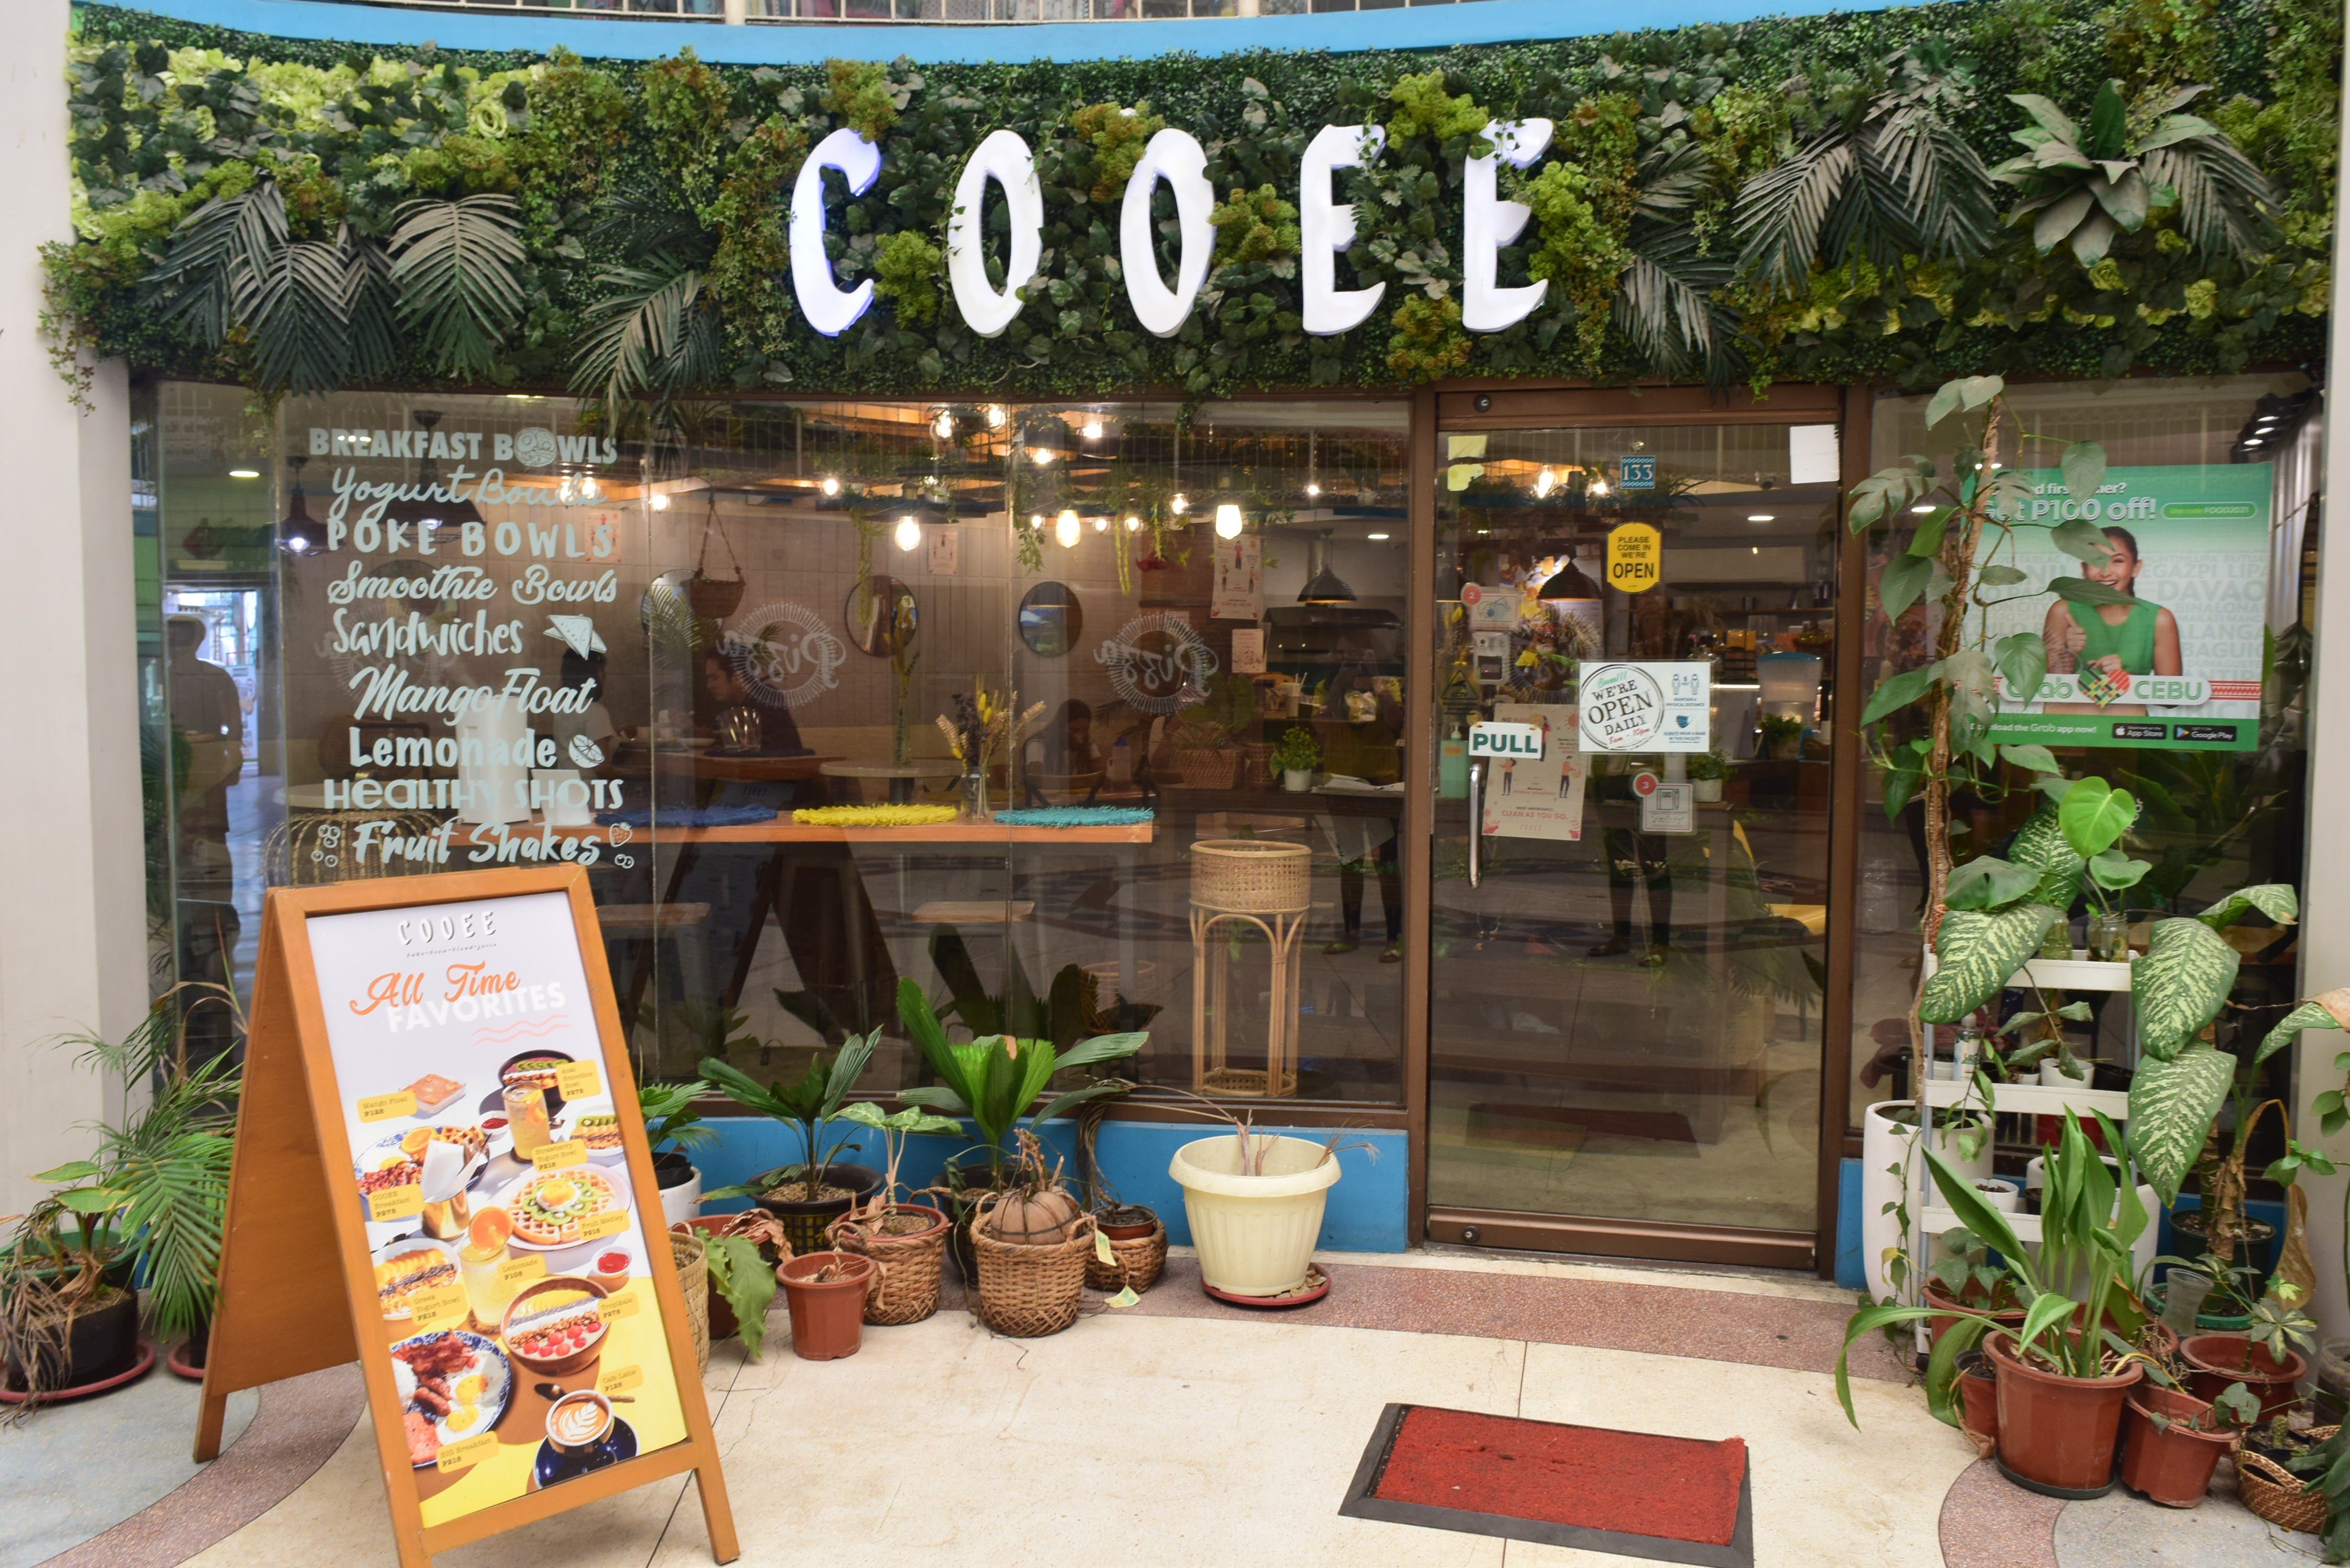 Introducing one of Cebu's most popular healthy cafes Cooee!